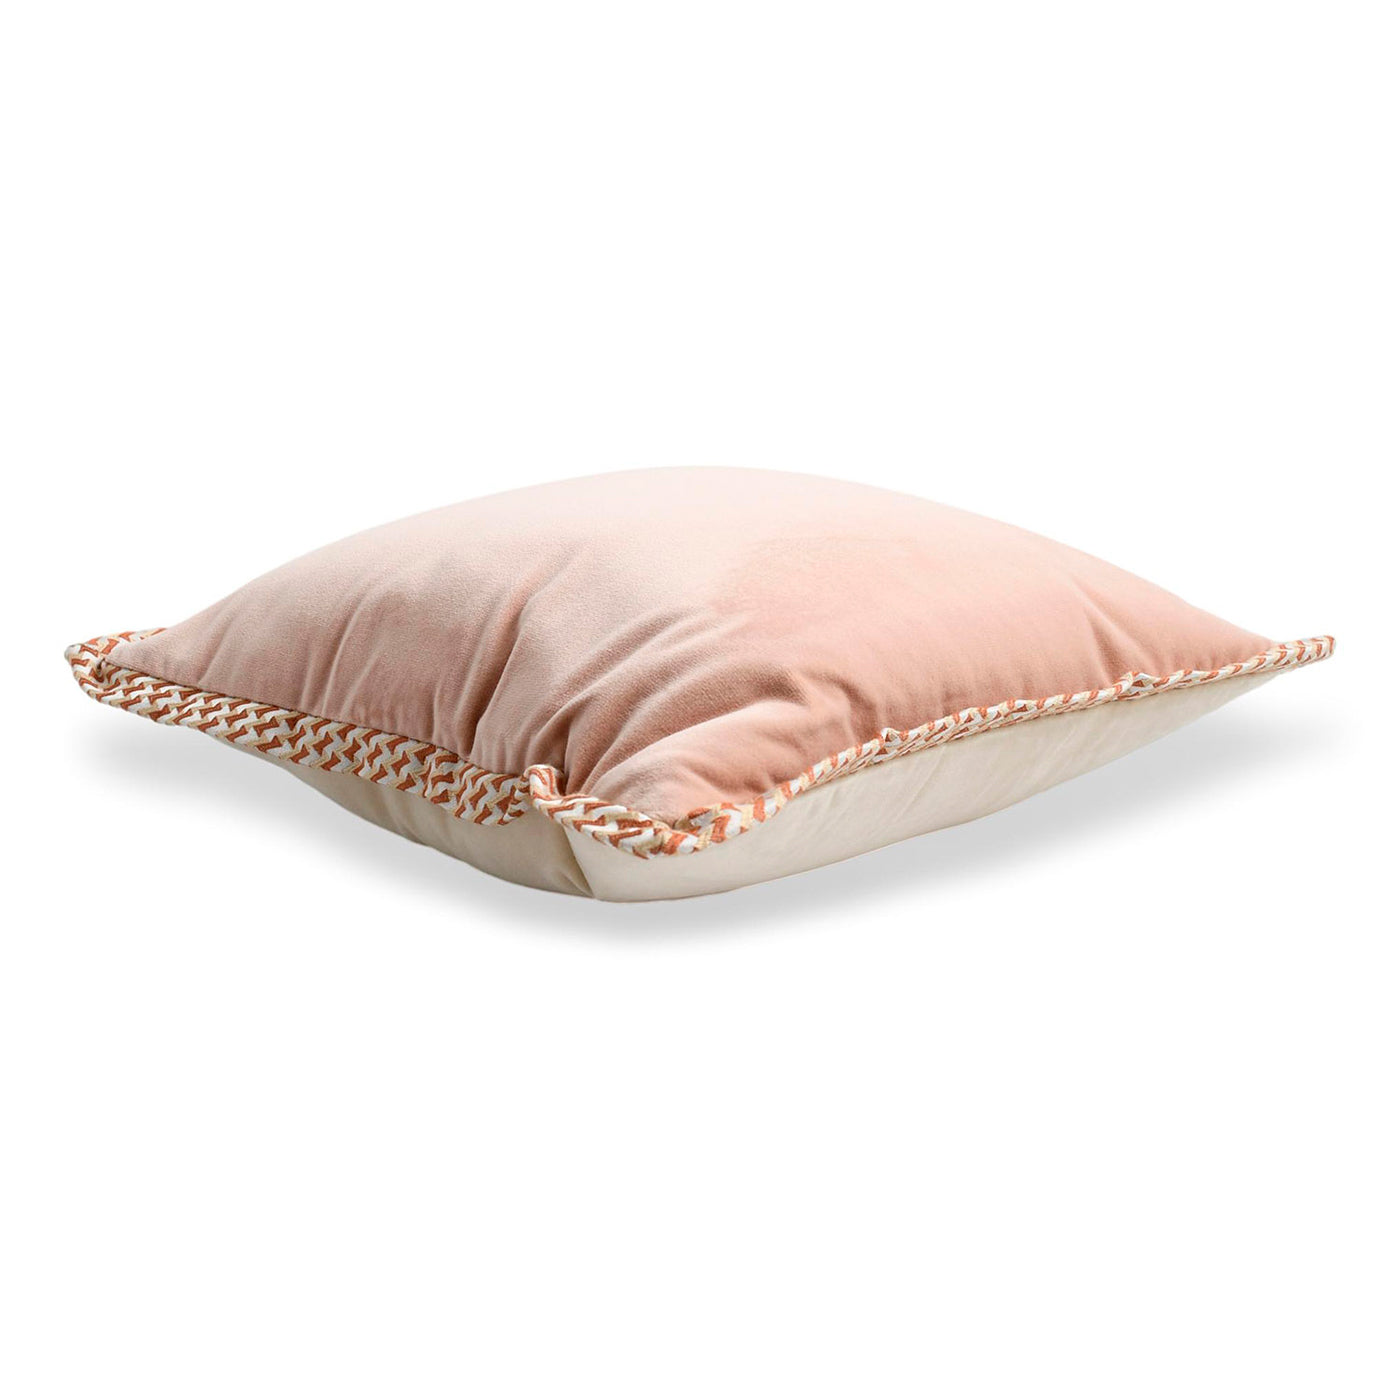 Pink Carrè Flat Cushion in cotton velvet and Micro-Patterned jacquard fabric - Alternative view 1